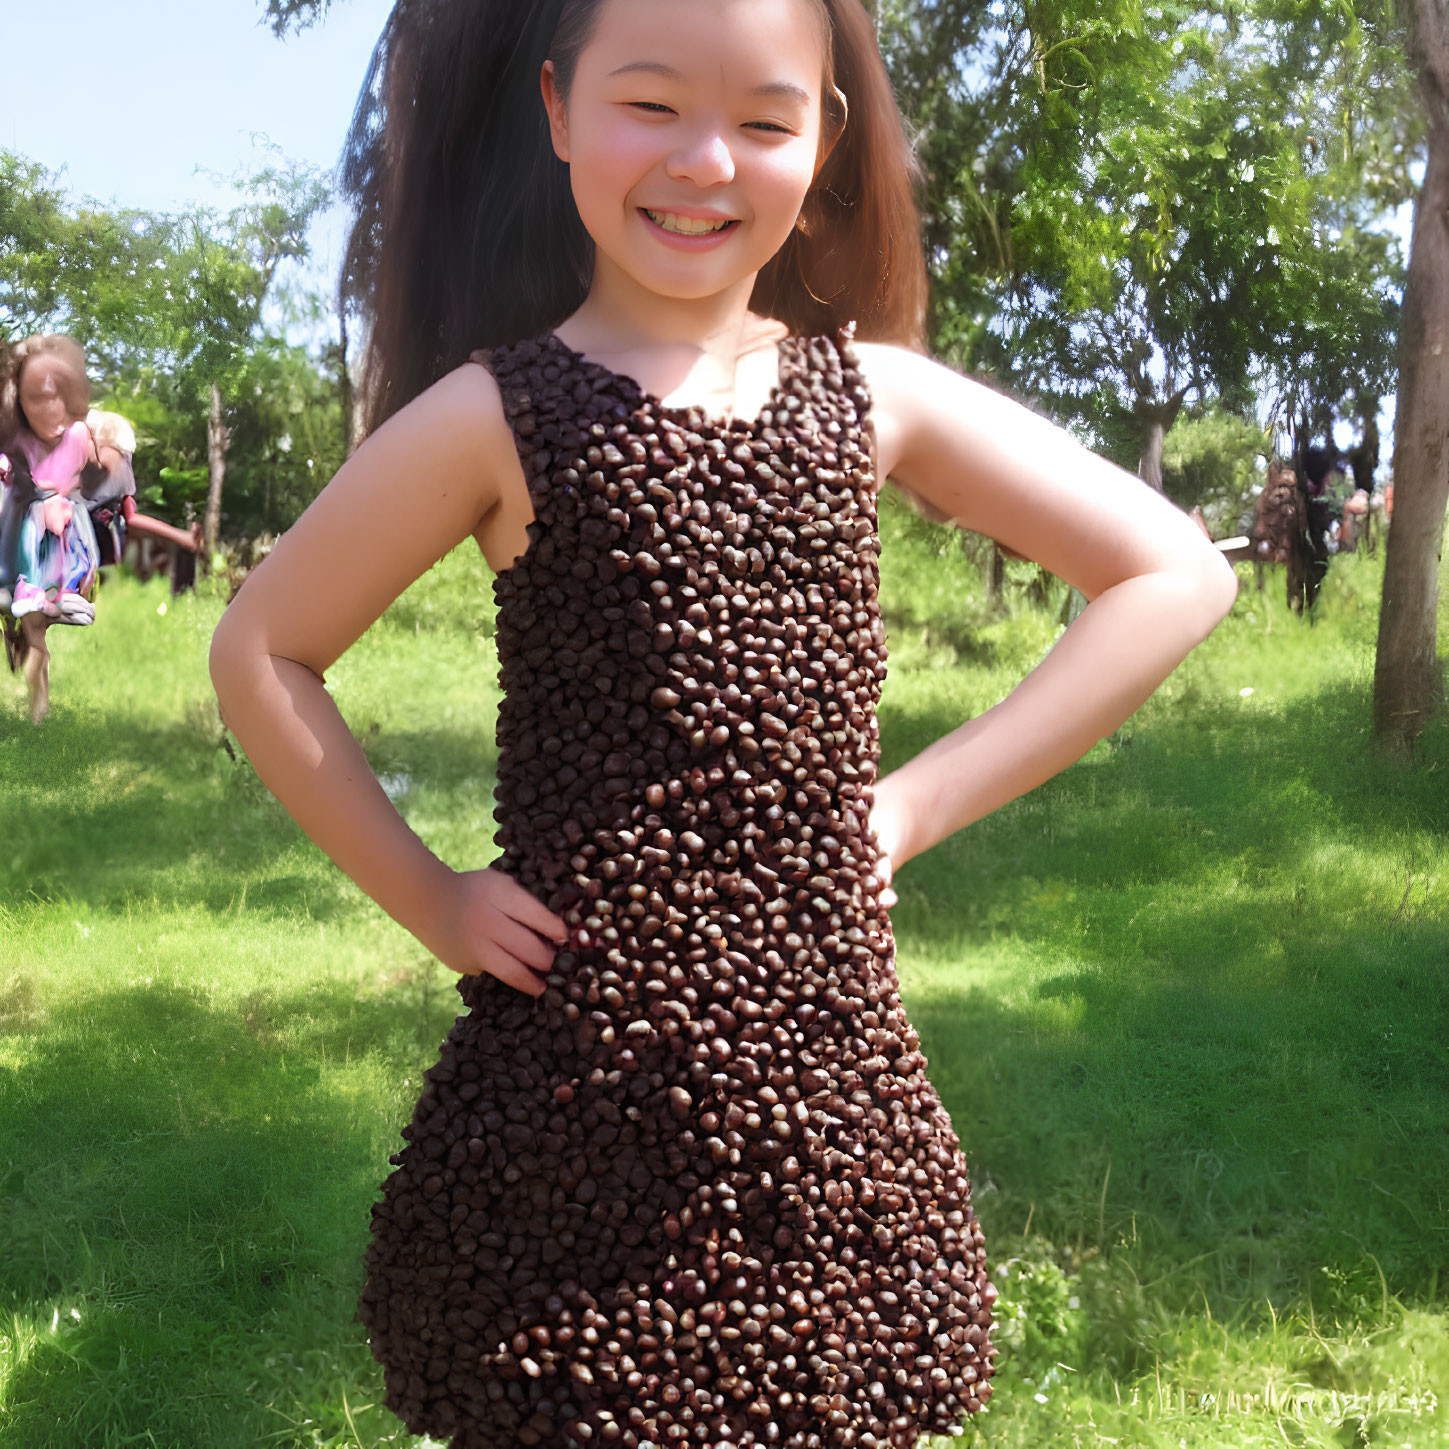 Young girl in coffee bean dress smiles in park with children and greenery